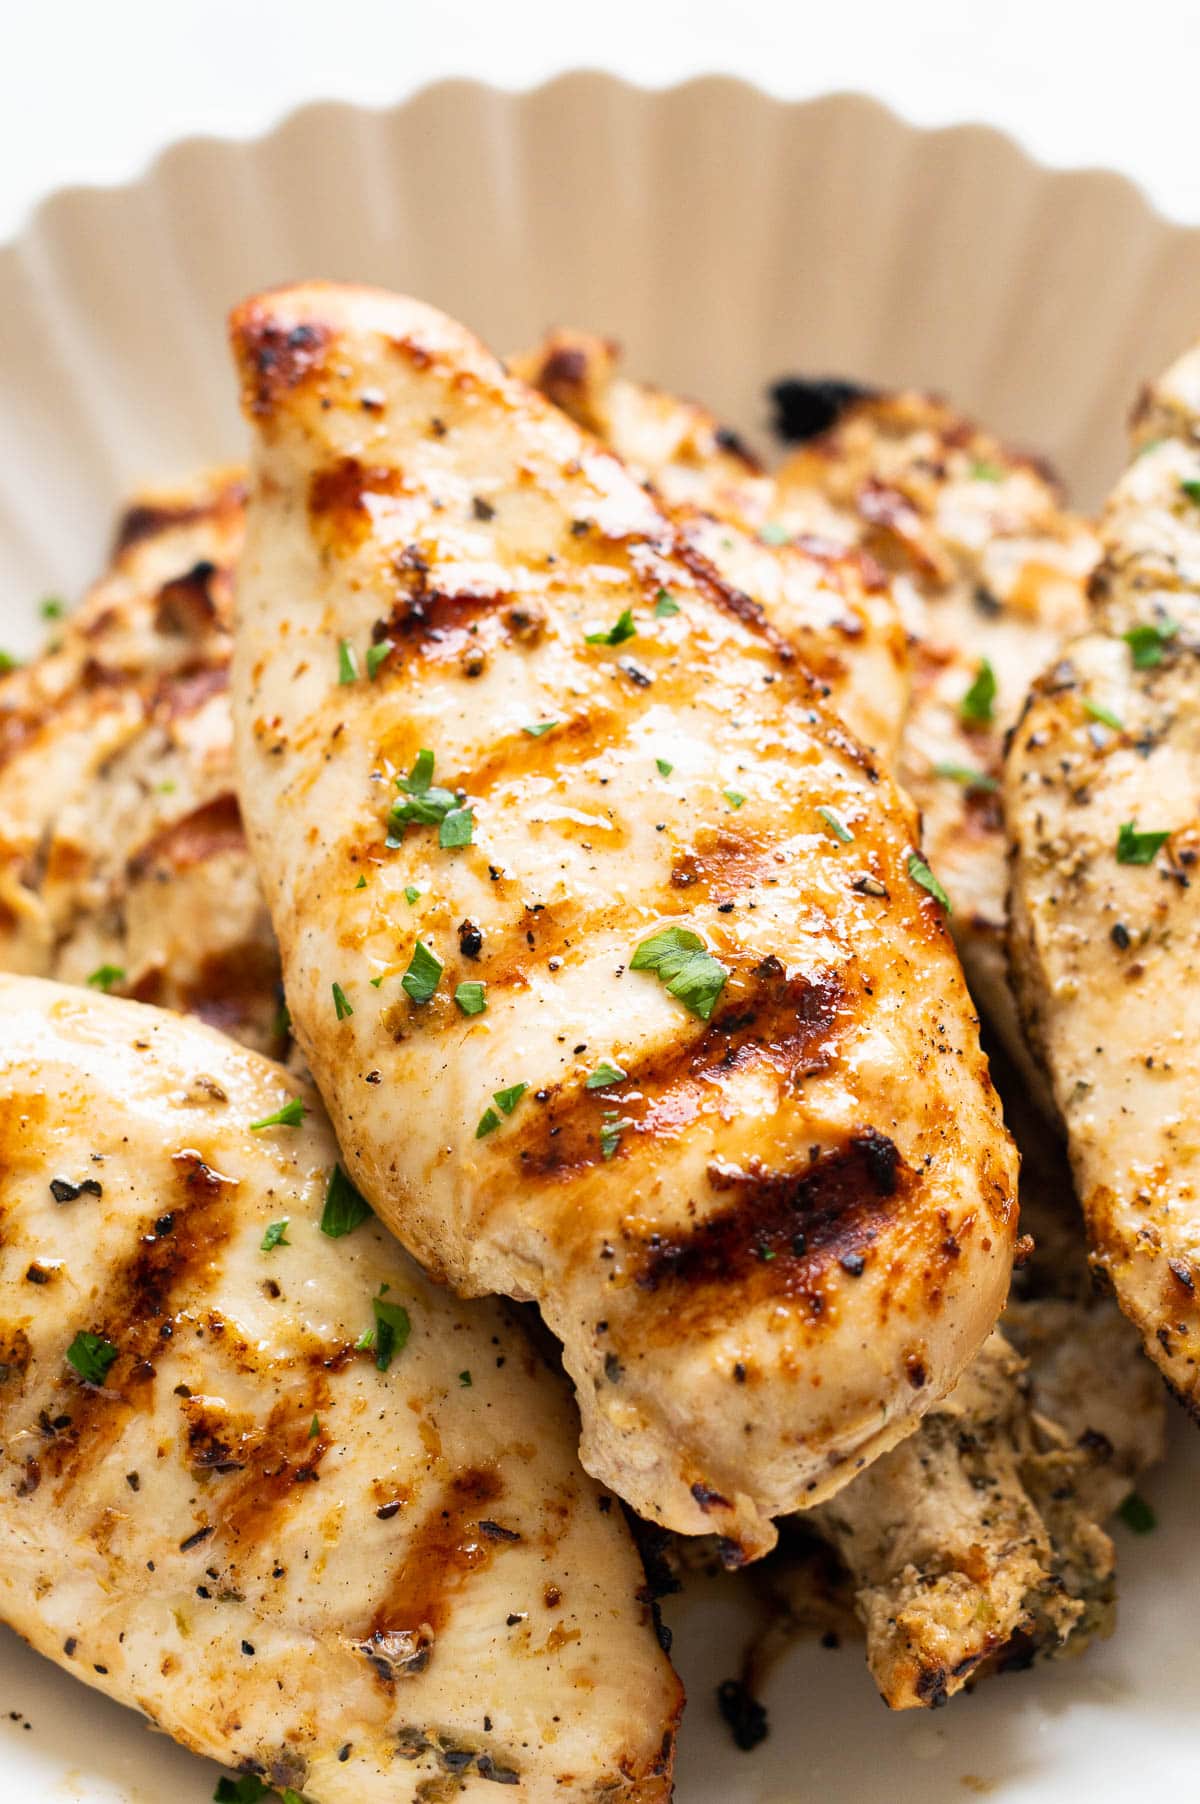 Grilled chicken breasts garnished with parsley.